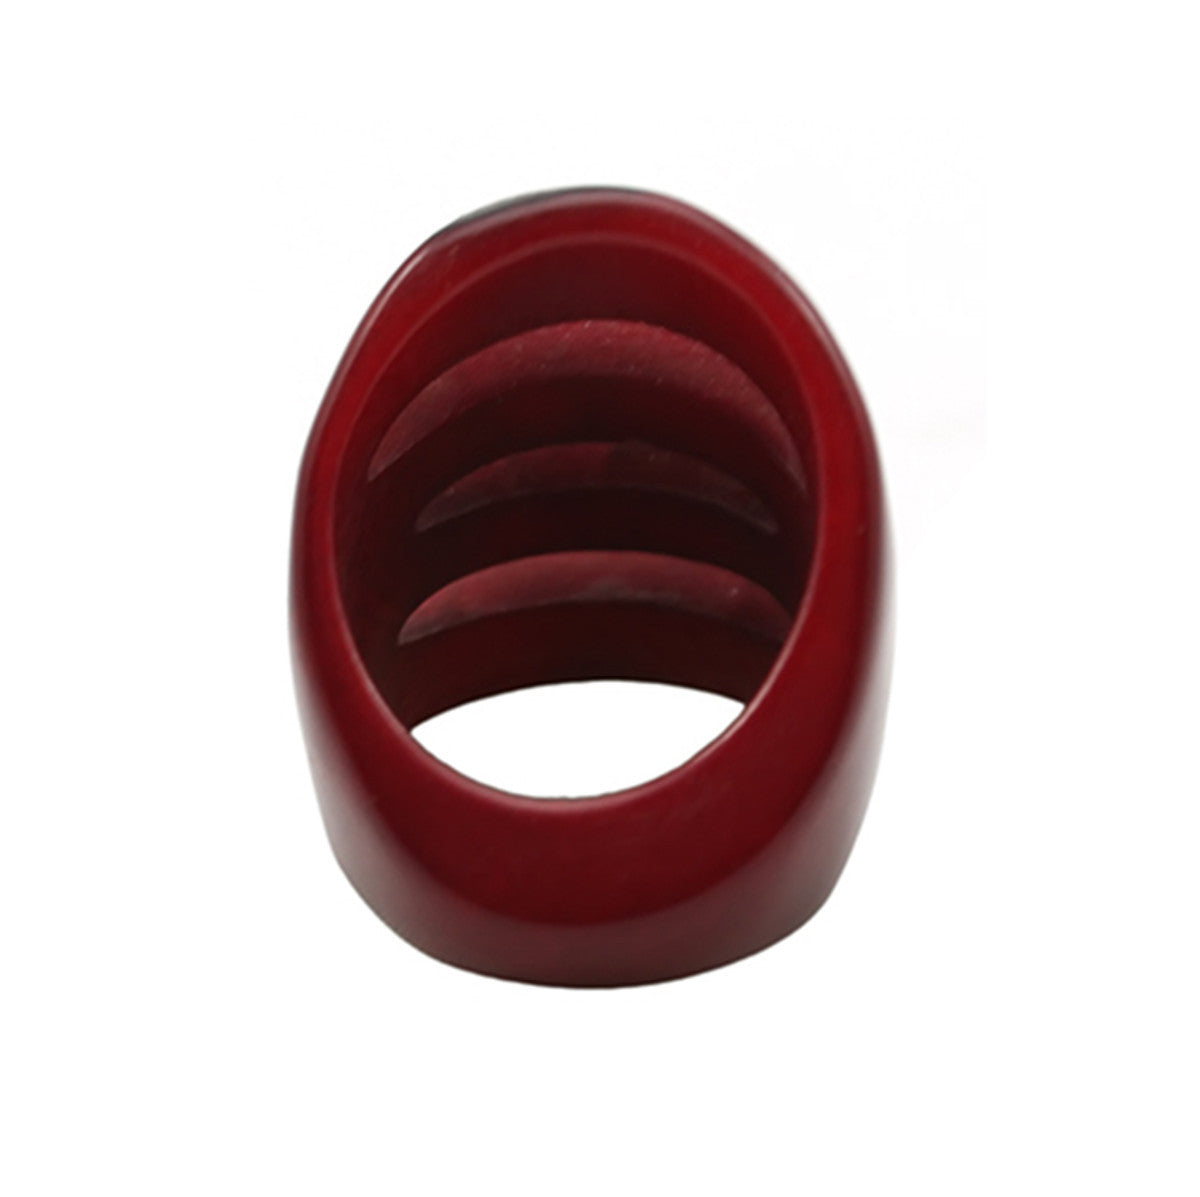 Sydney Statement Vegetable Ivory Ring in Red